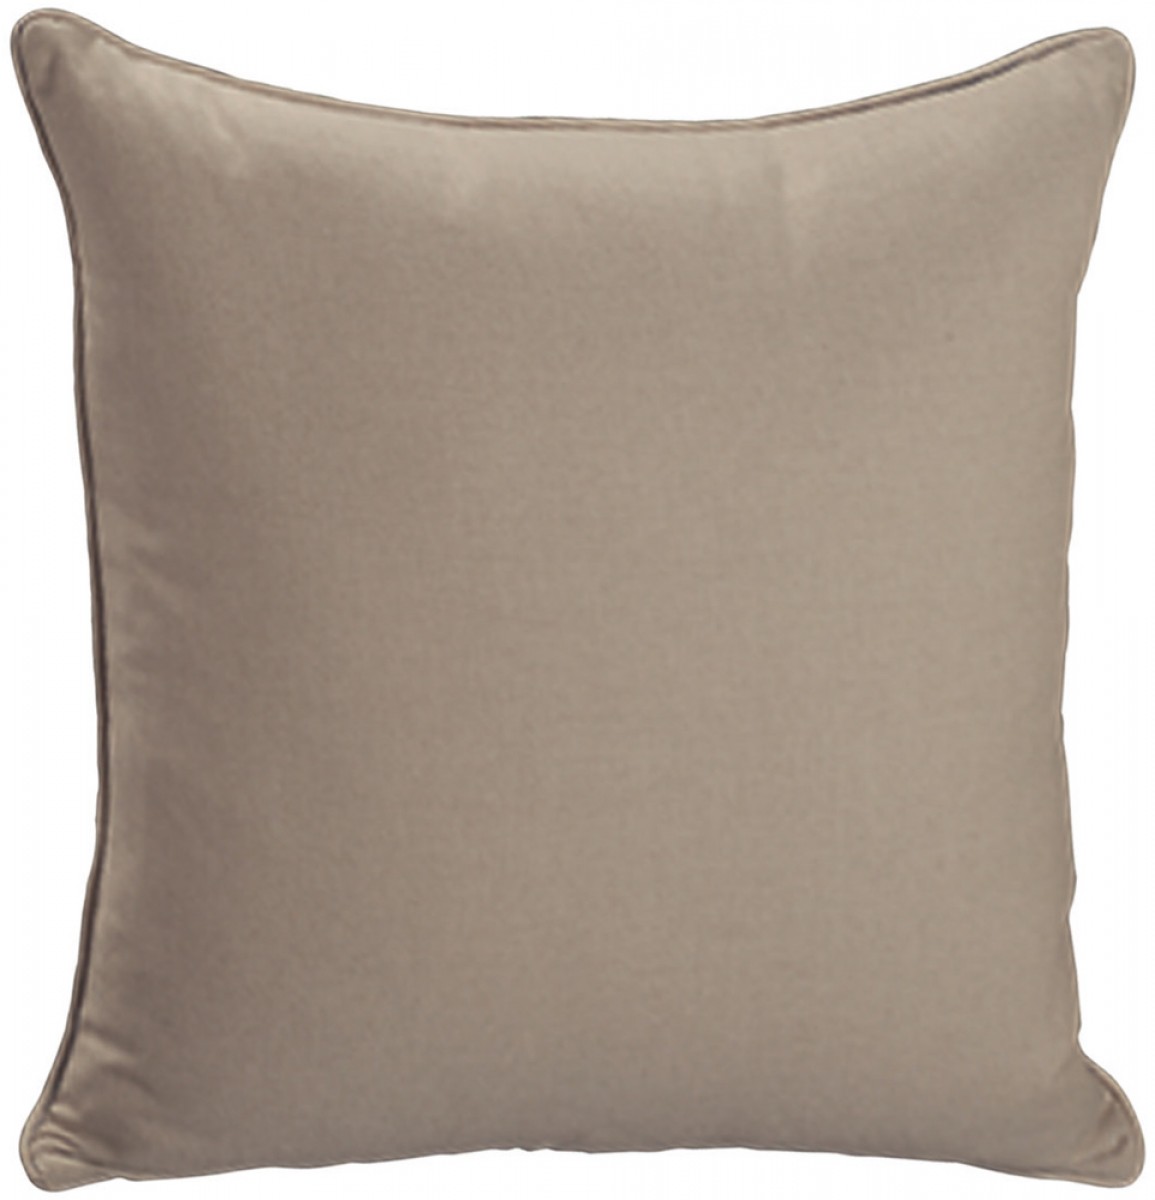 Throw Pillow Knife Edge Square 17"x17", Blendown - Without Welt